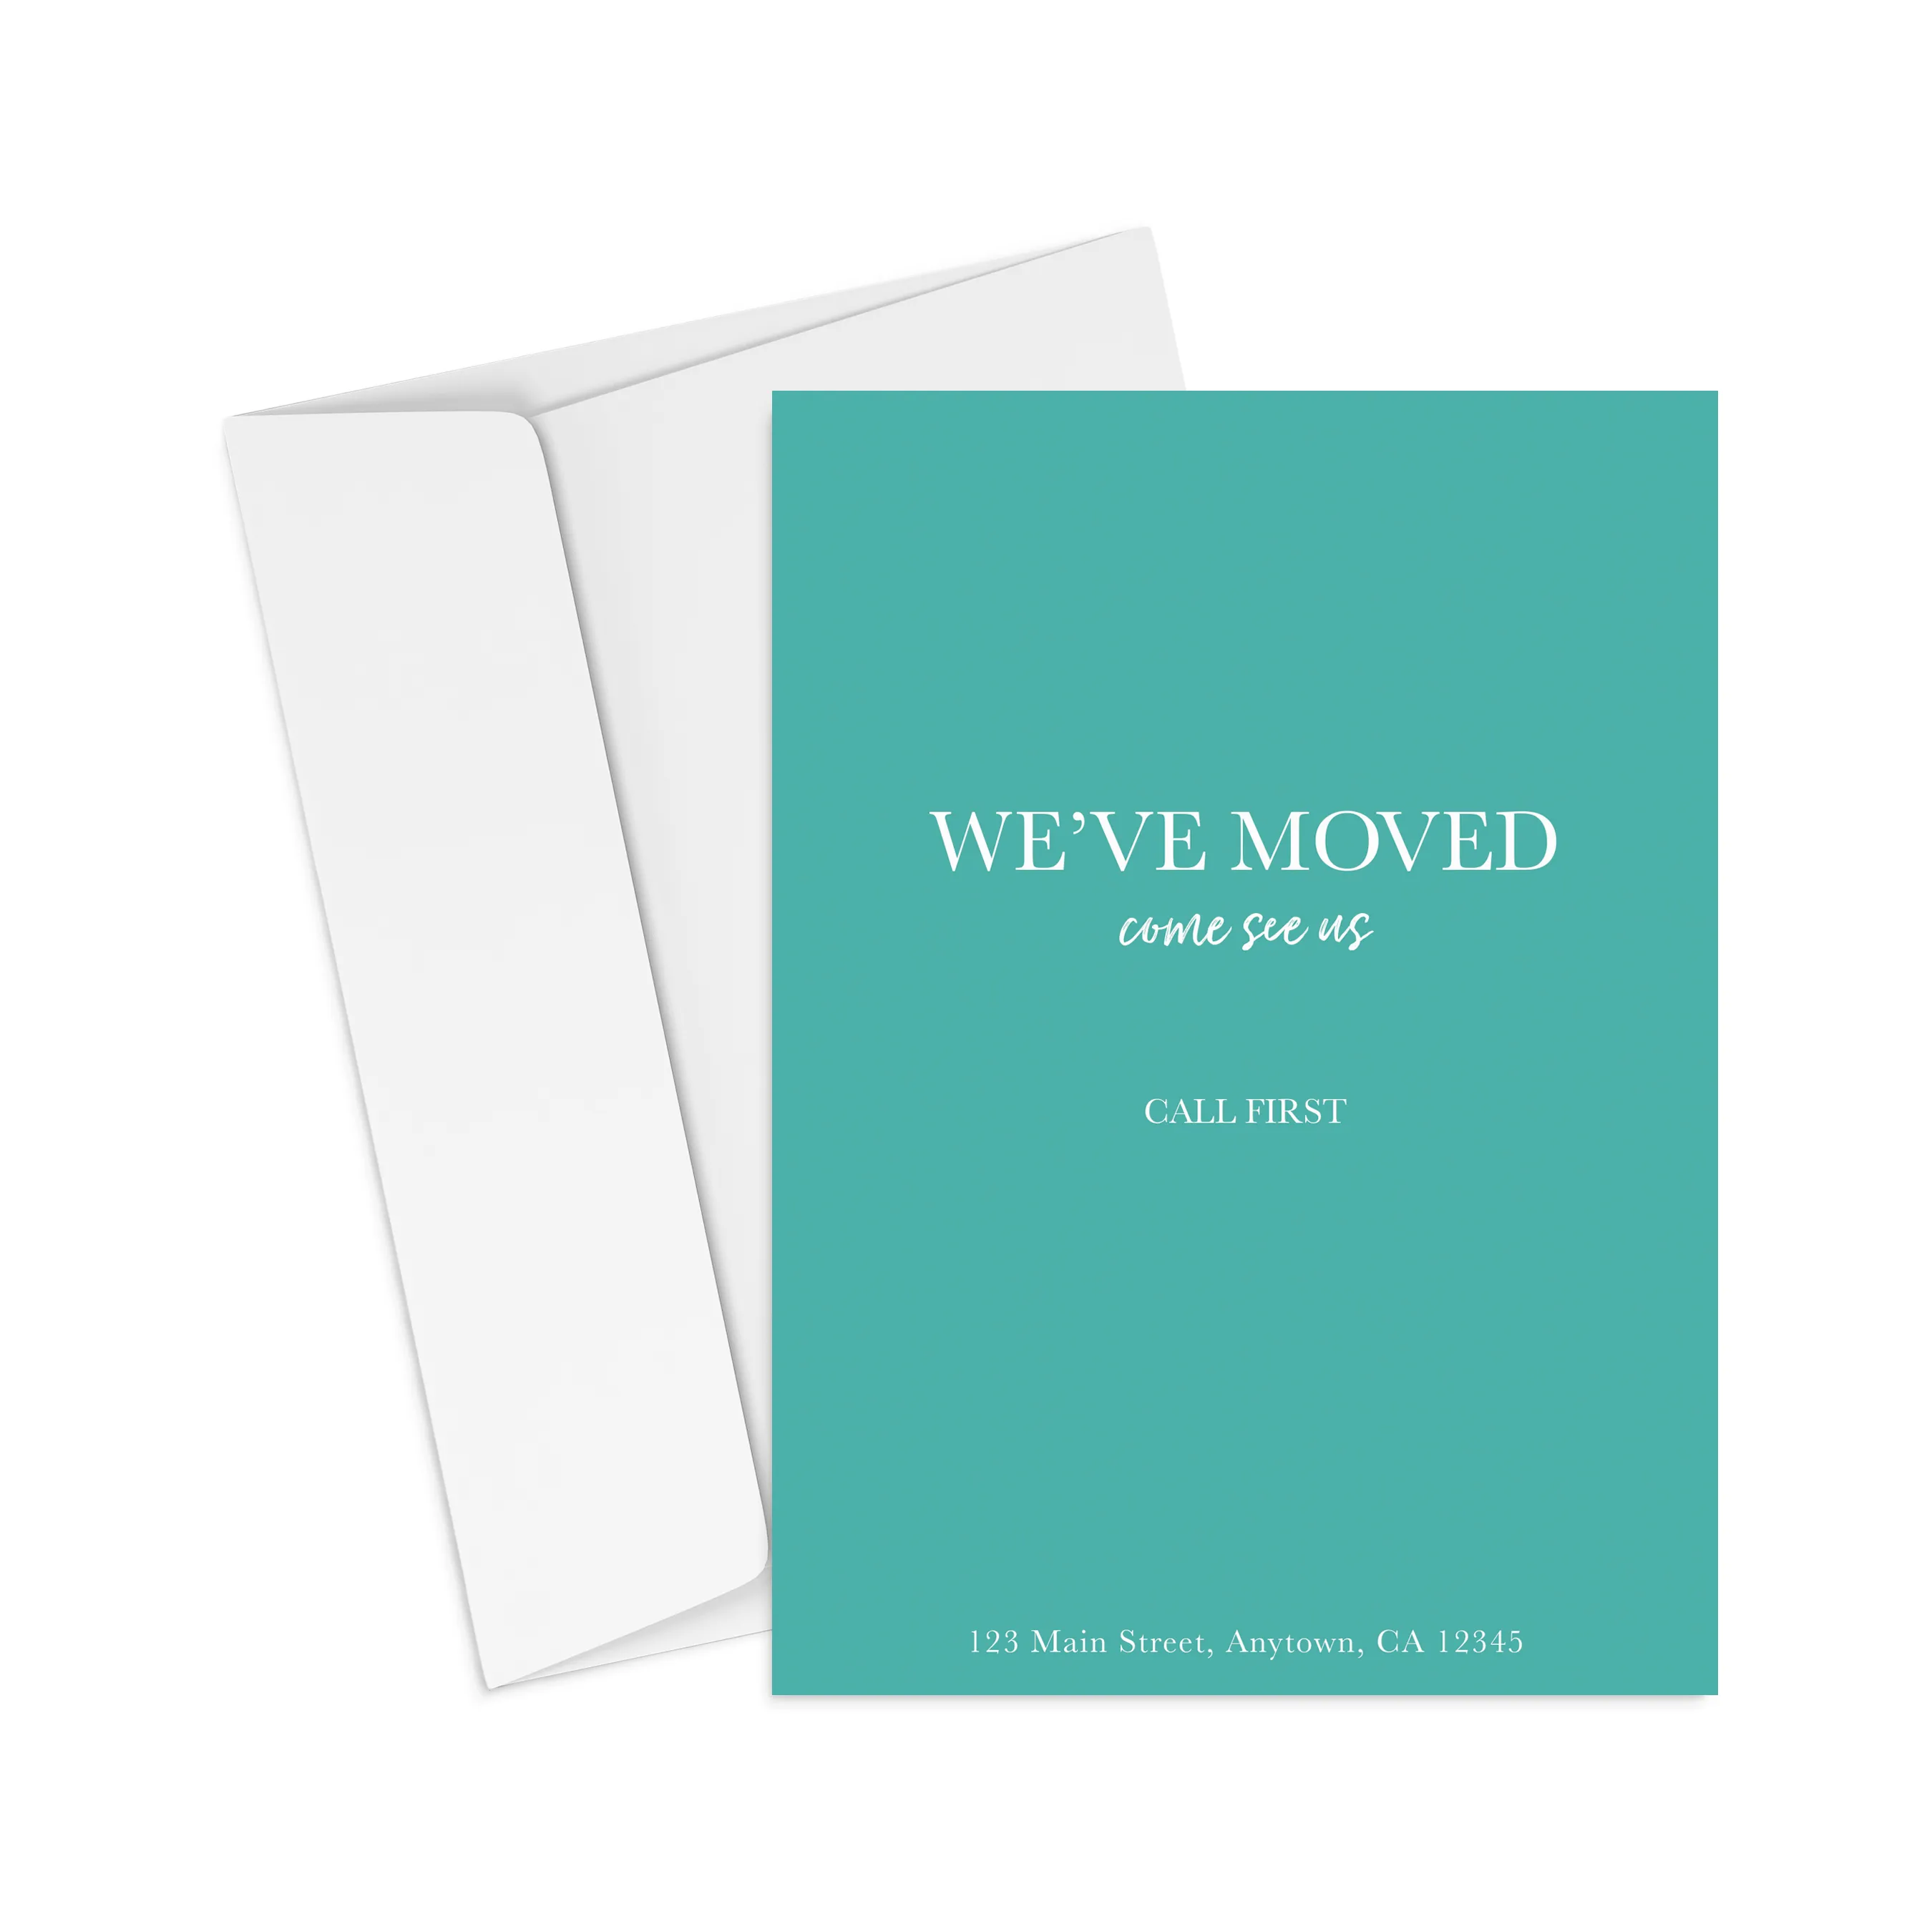 We Moved - Call First - Teal